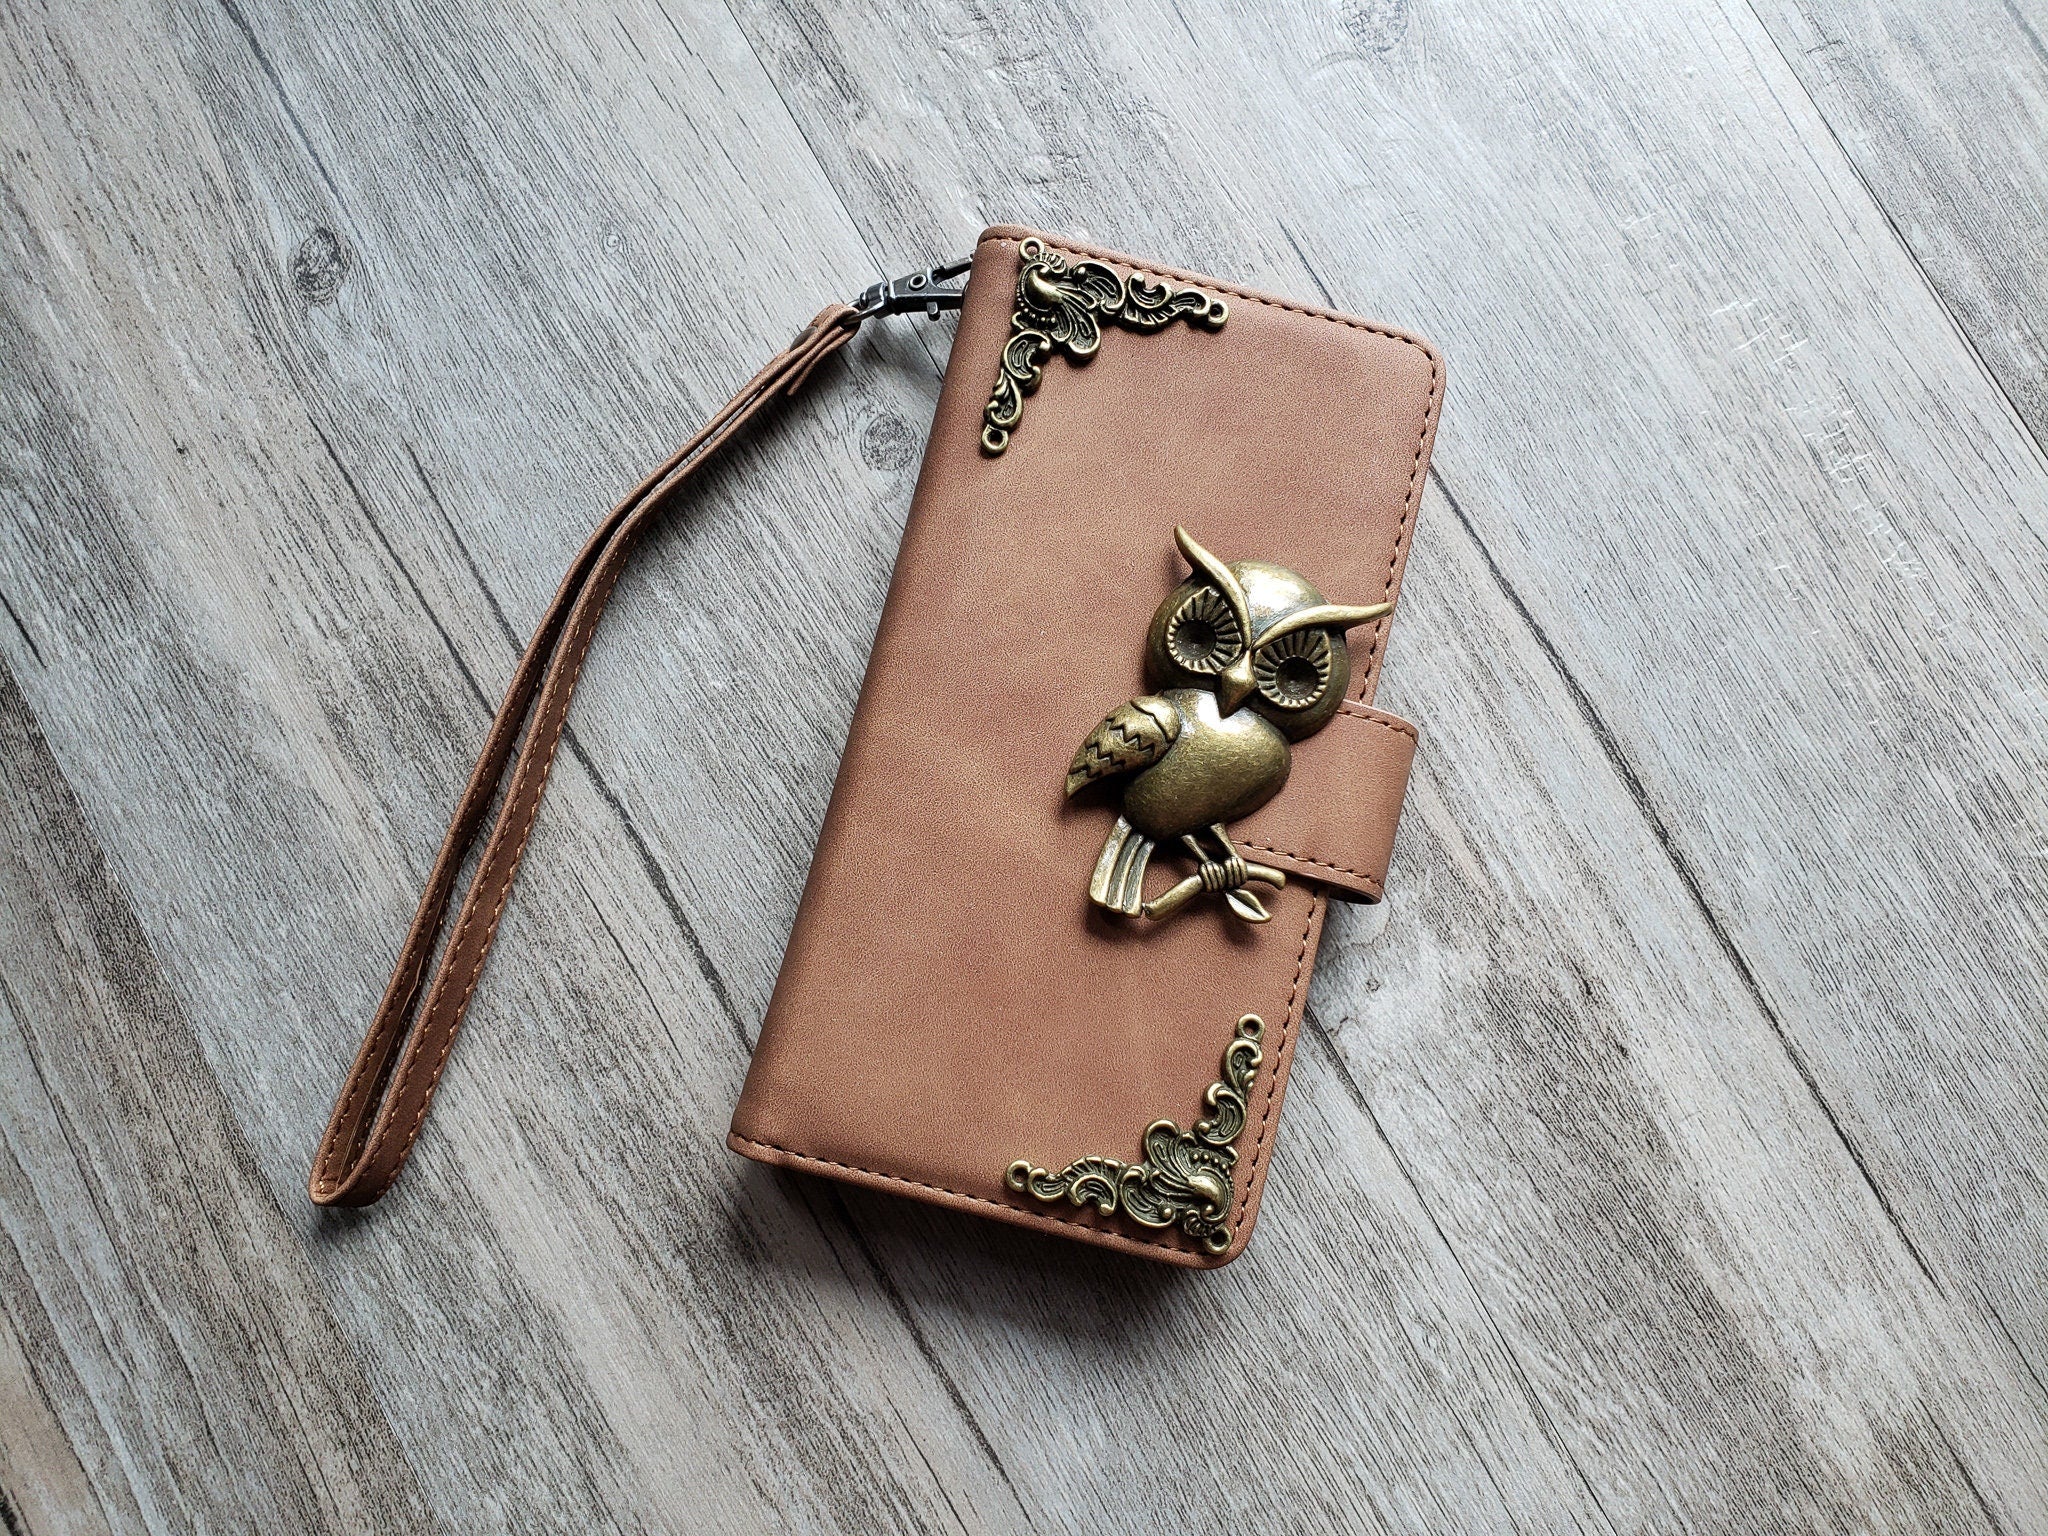  Owl Genuiine Leather Animal Bag Charm/Keychain *VANCA*  Handmade in Japan : Cell Phone Charms : Office Products